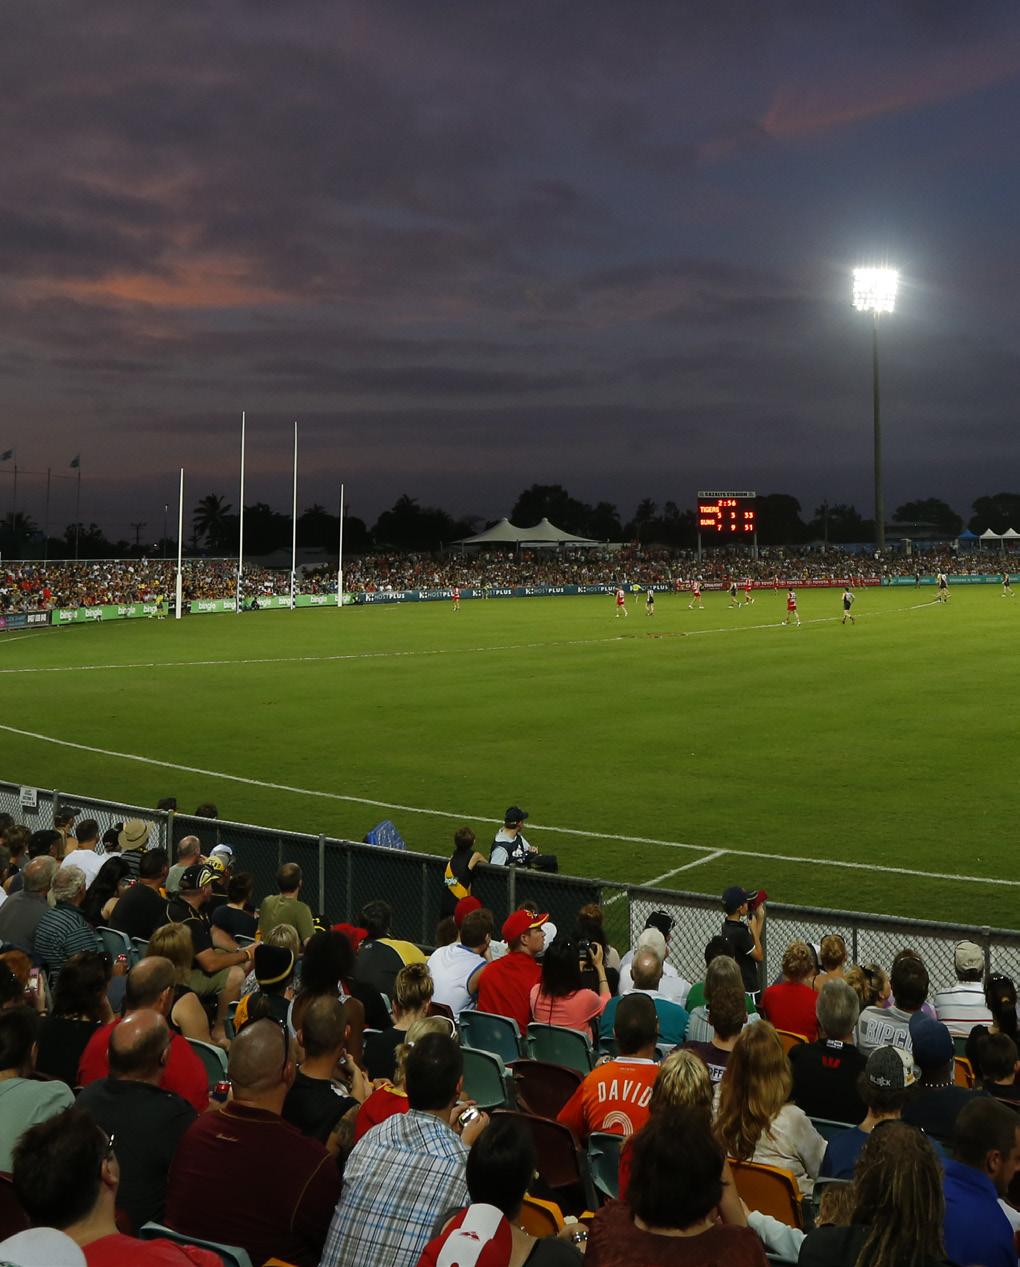 ENTERTAIN YOUR GUESTS 2014 sees AFL Cairns and Cazalys Stadium host its fourth Toyota AFL Premiership match and for the first time we welcome the Western Bulldogs to Far North Queensland to take on